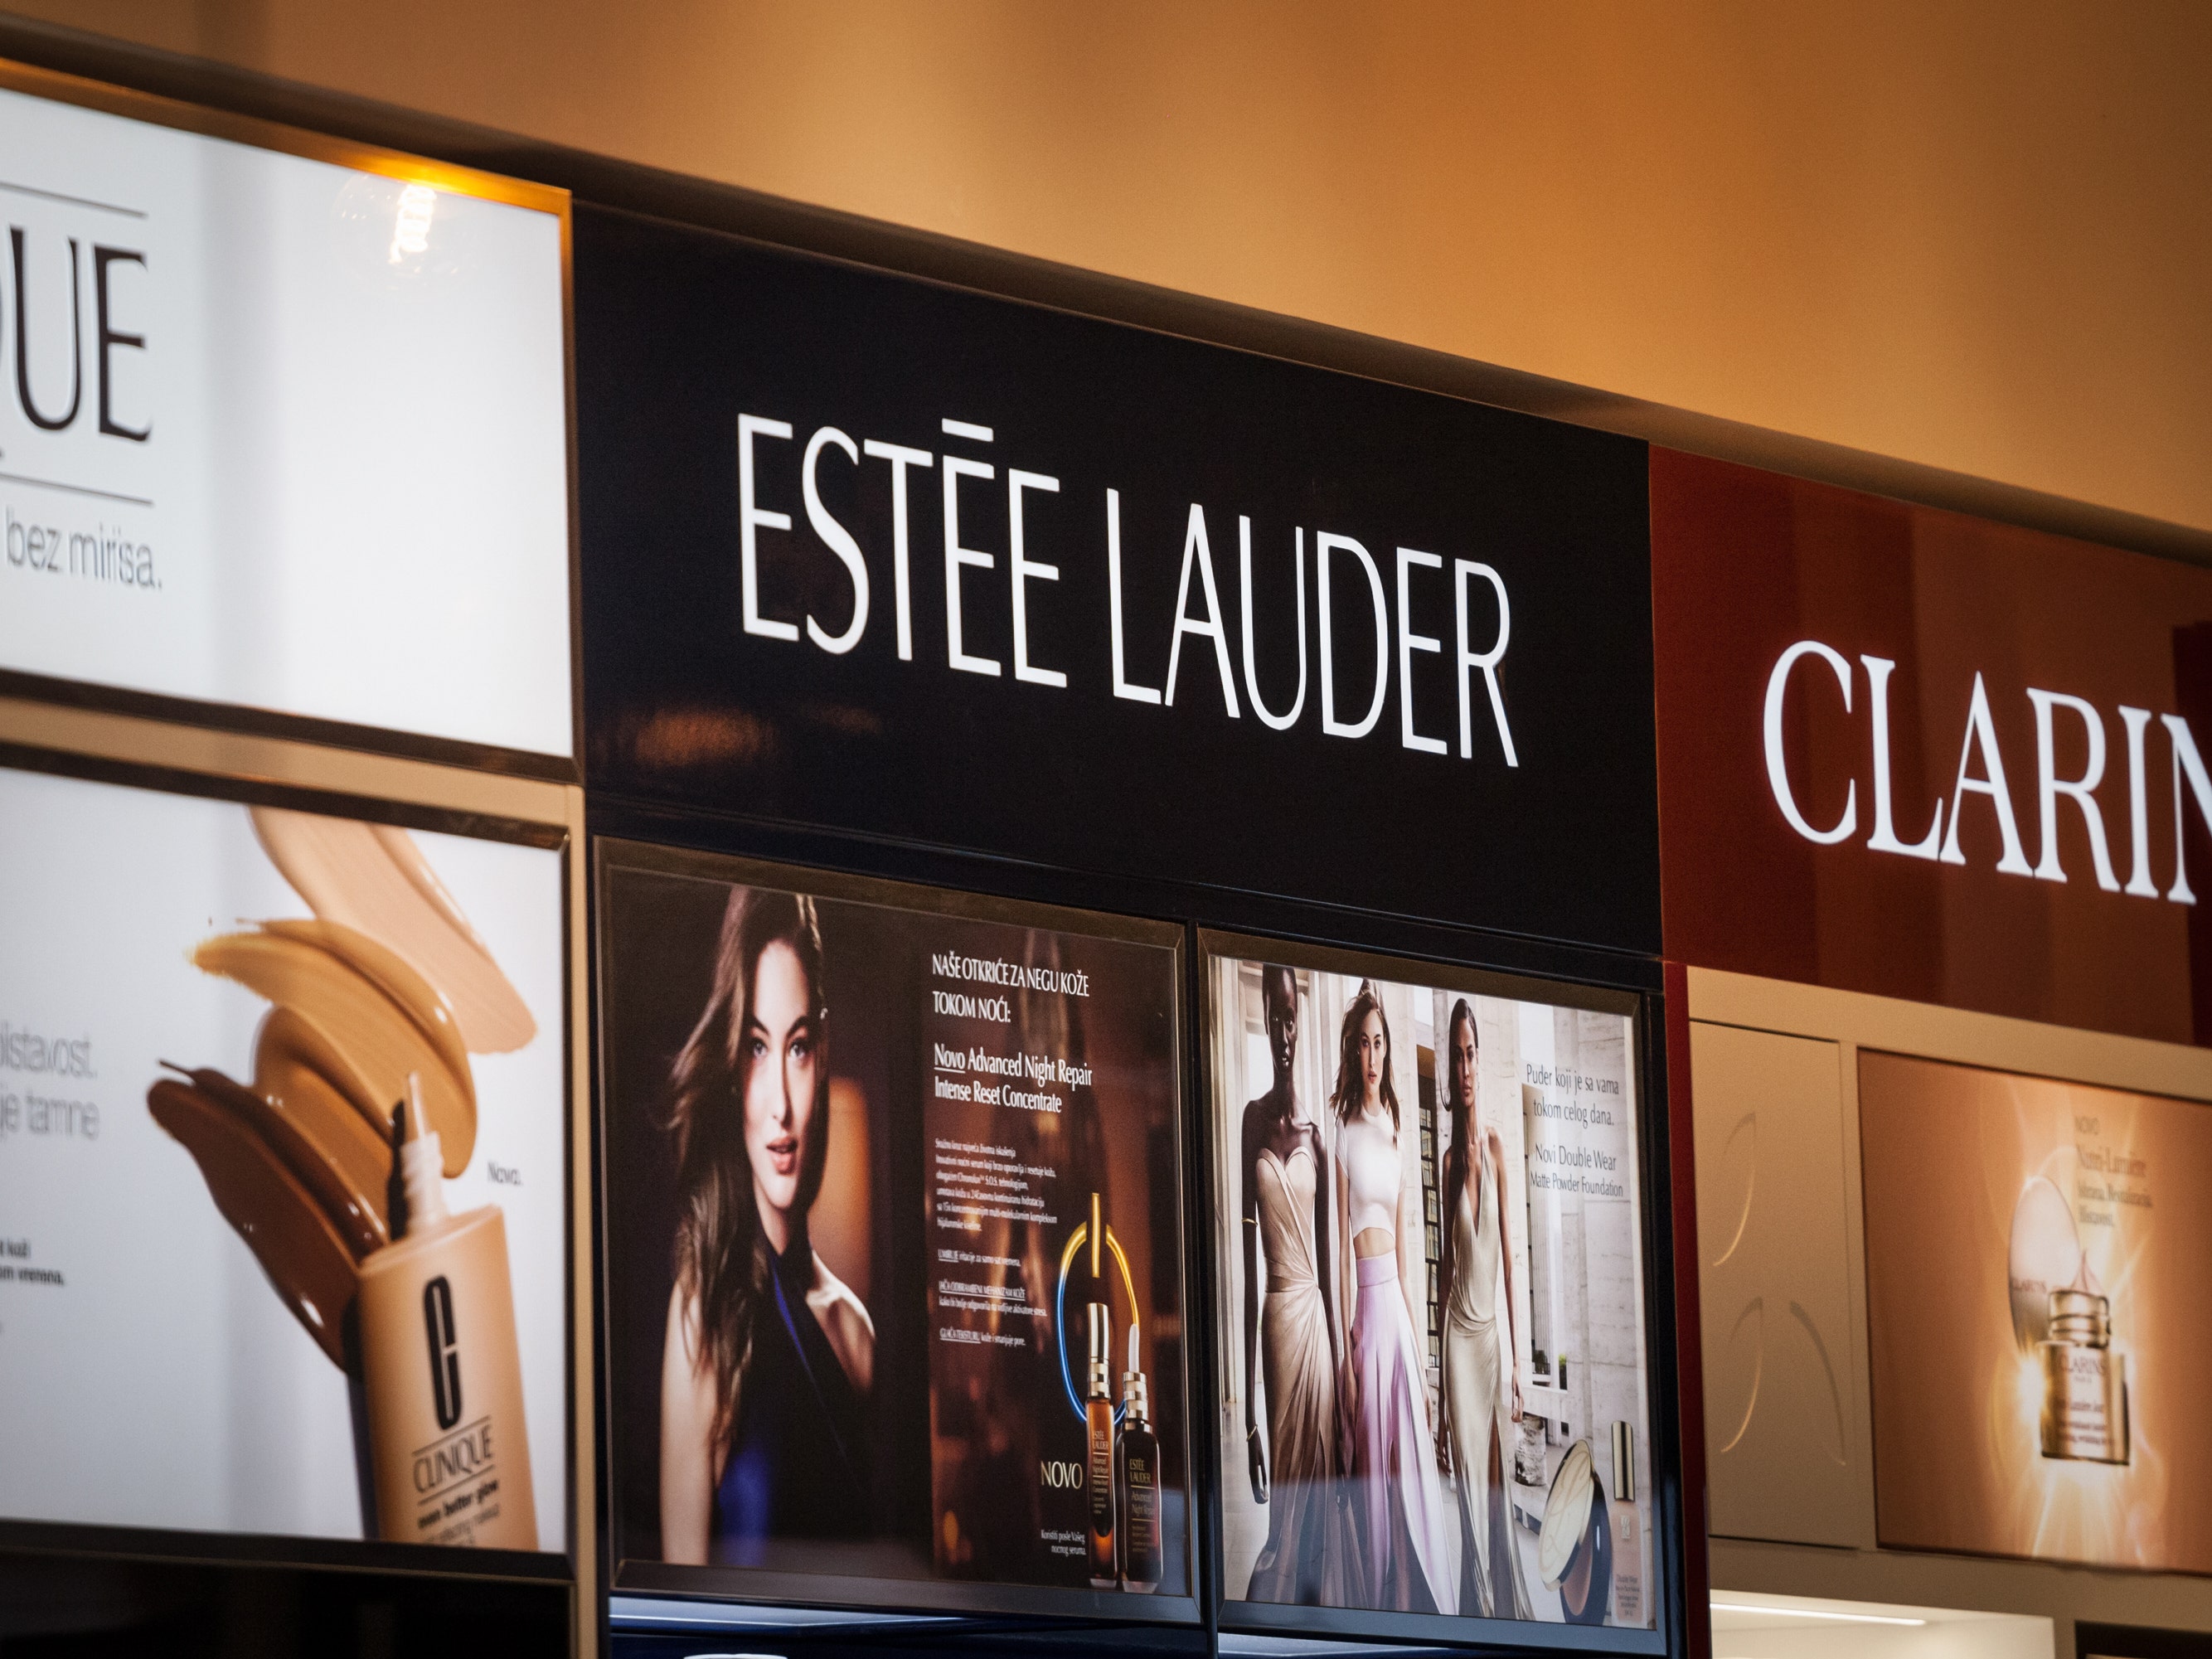 Estée Lauder Companies to acquire Deciem in two-phase deal by 2024